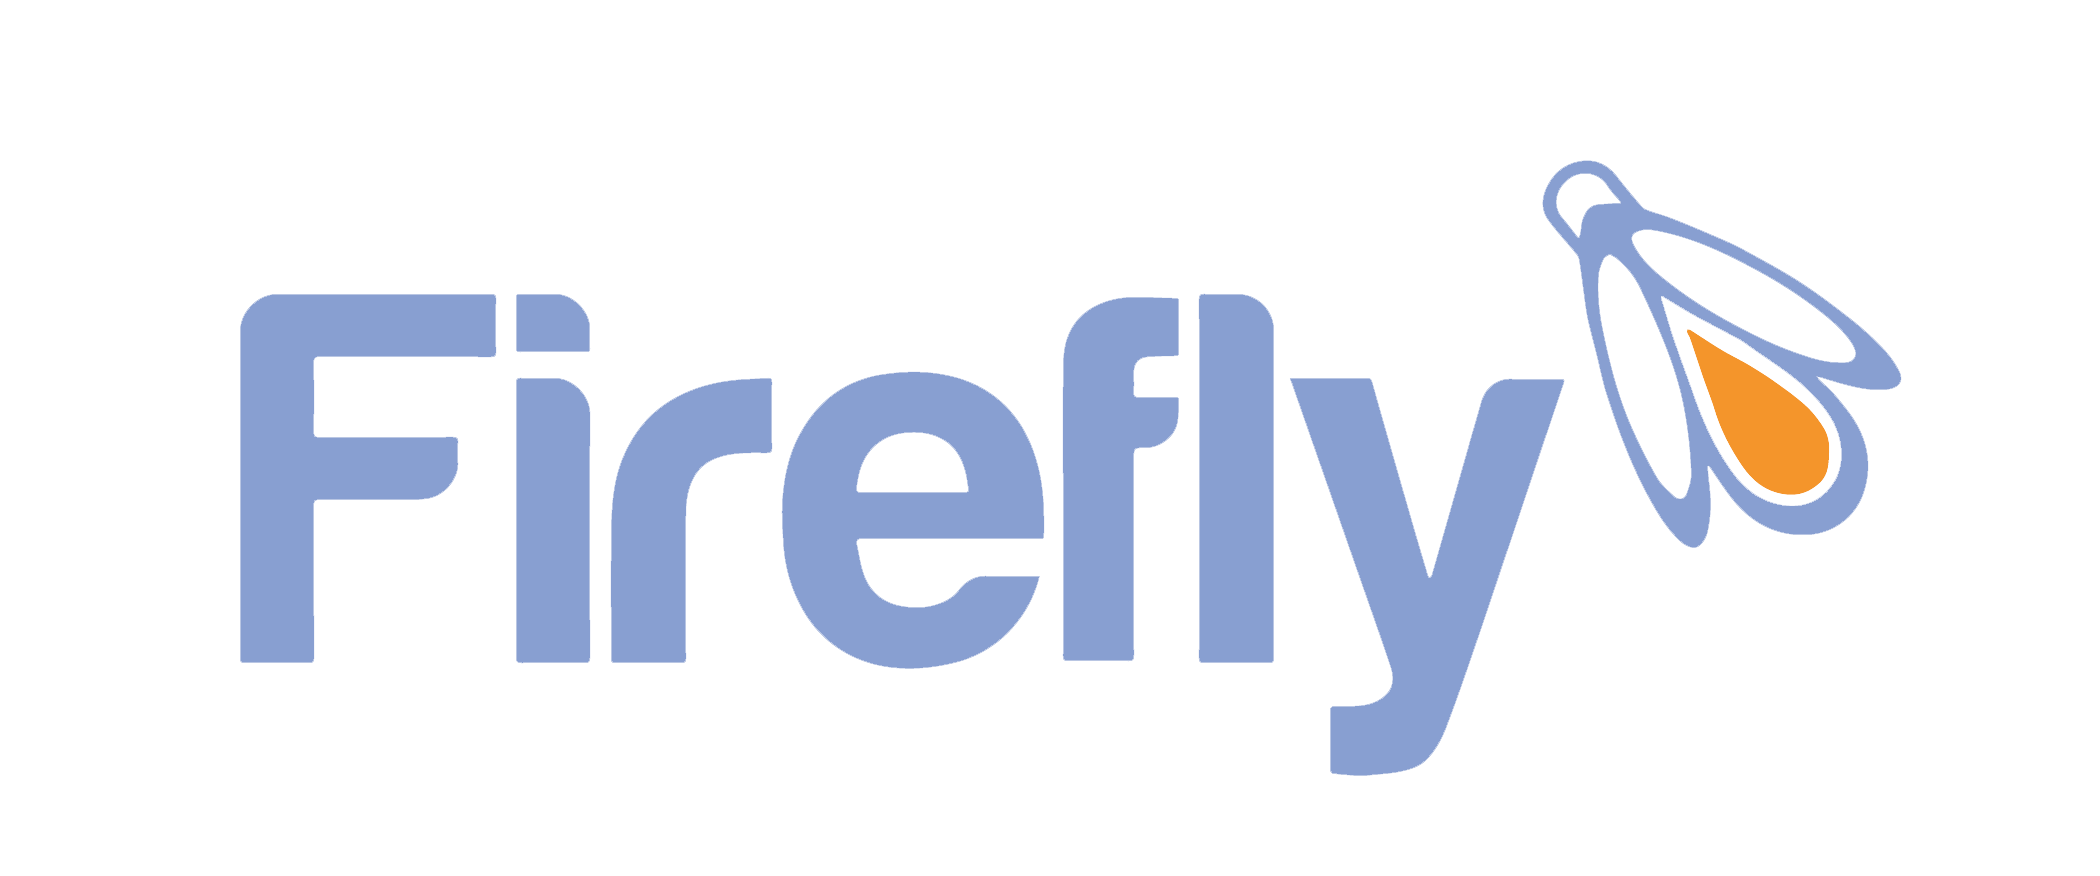 Firefly Business Group